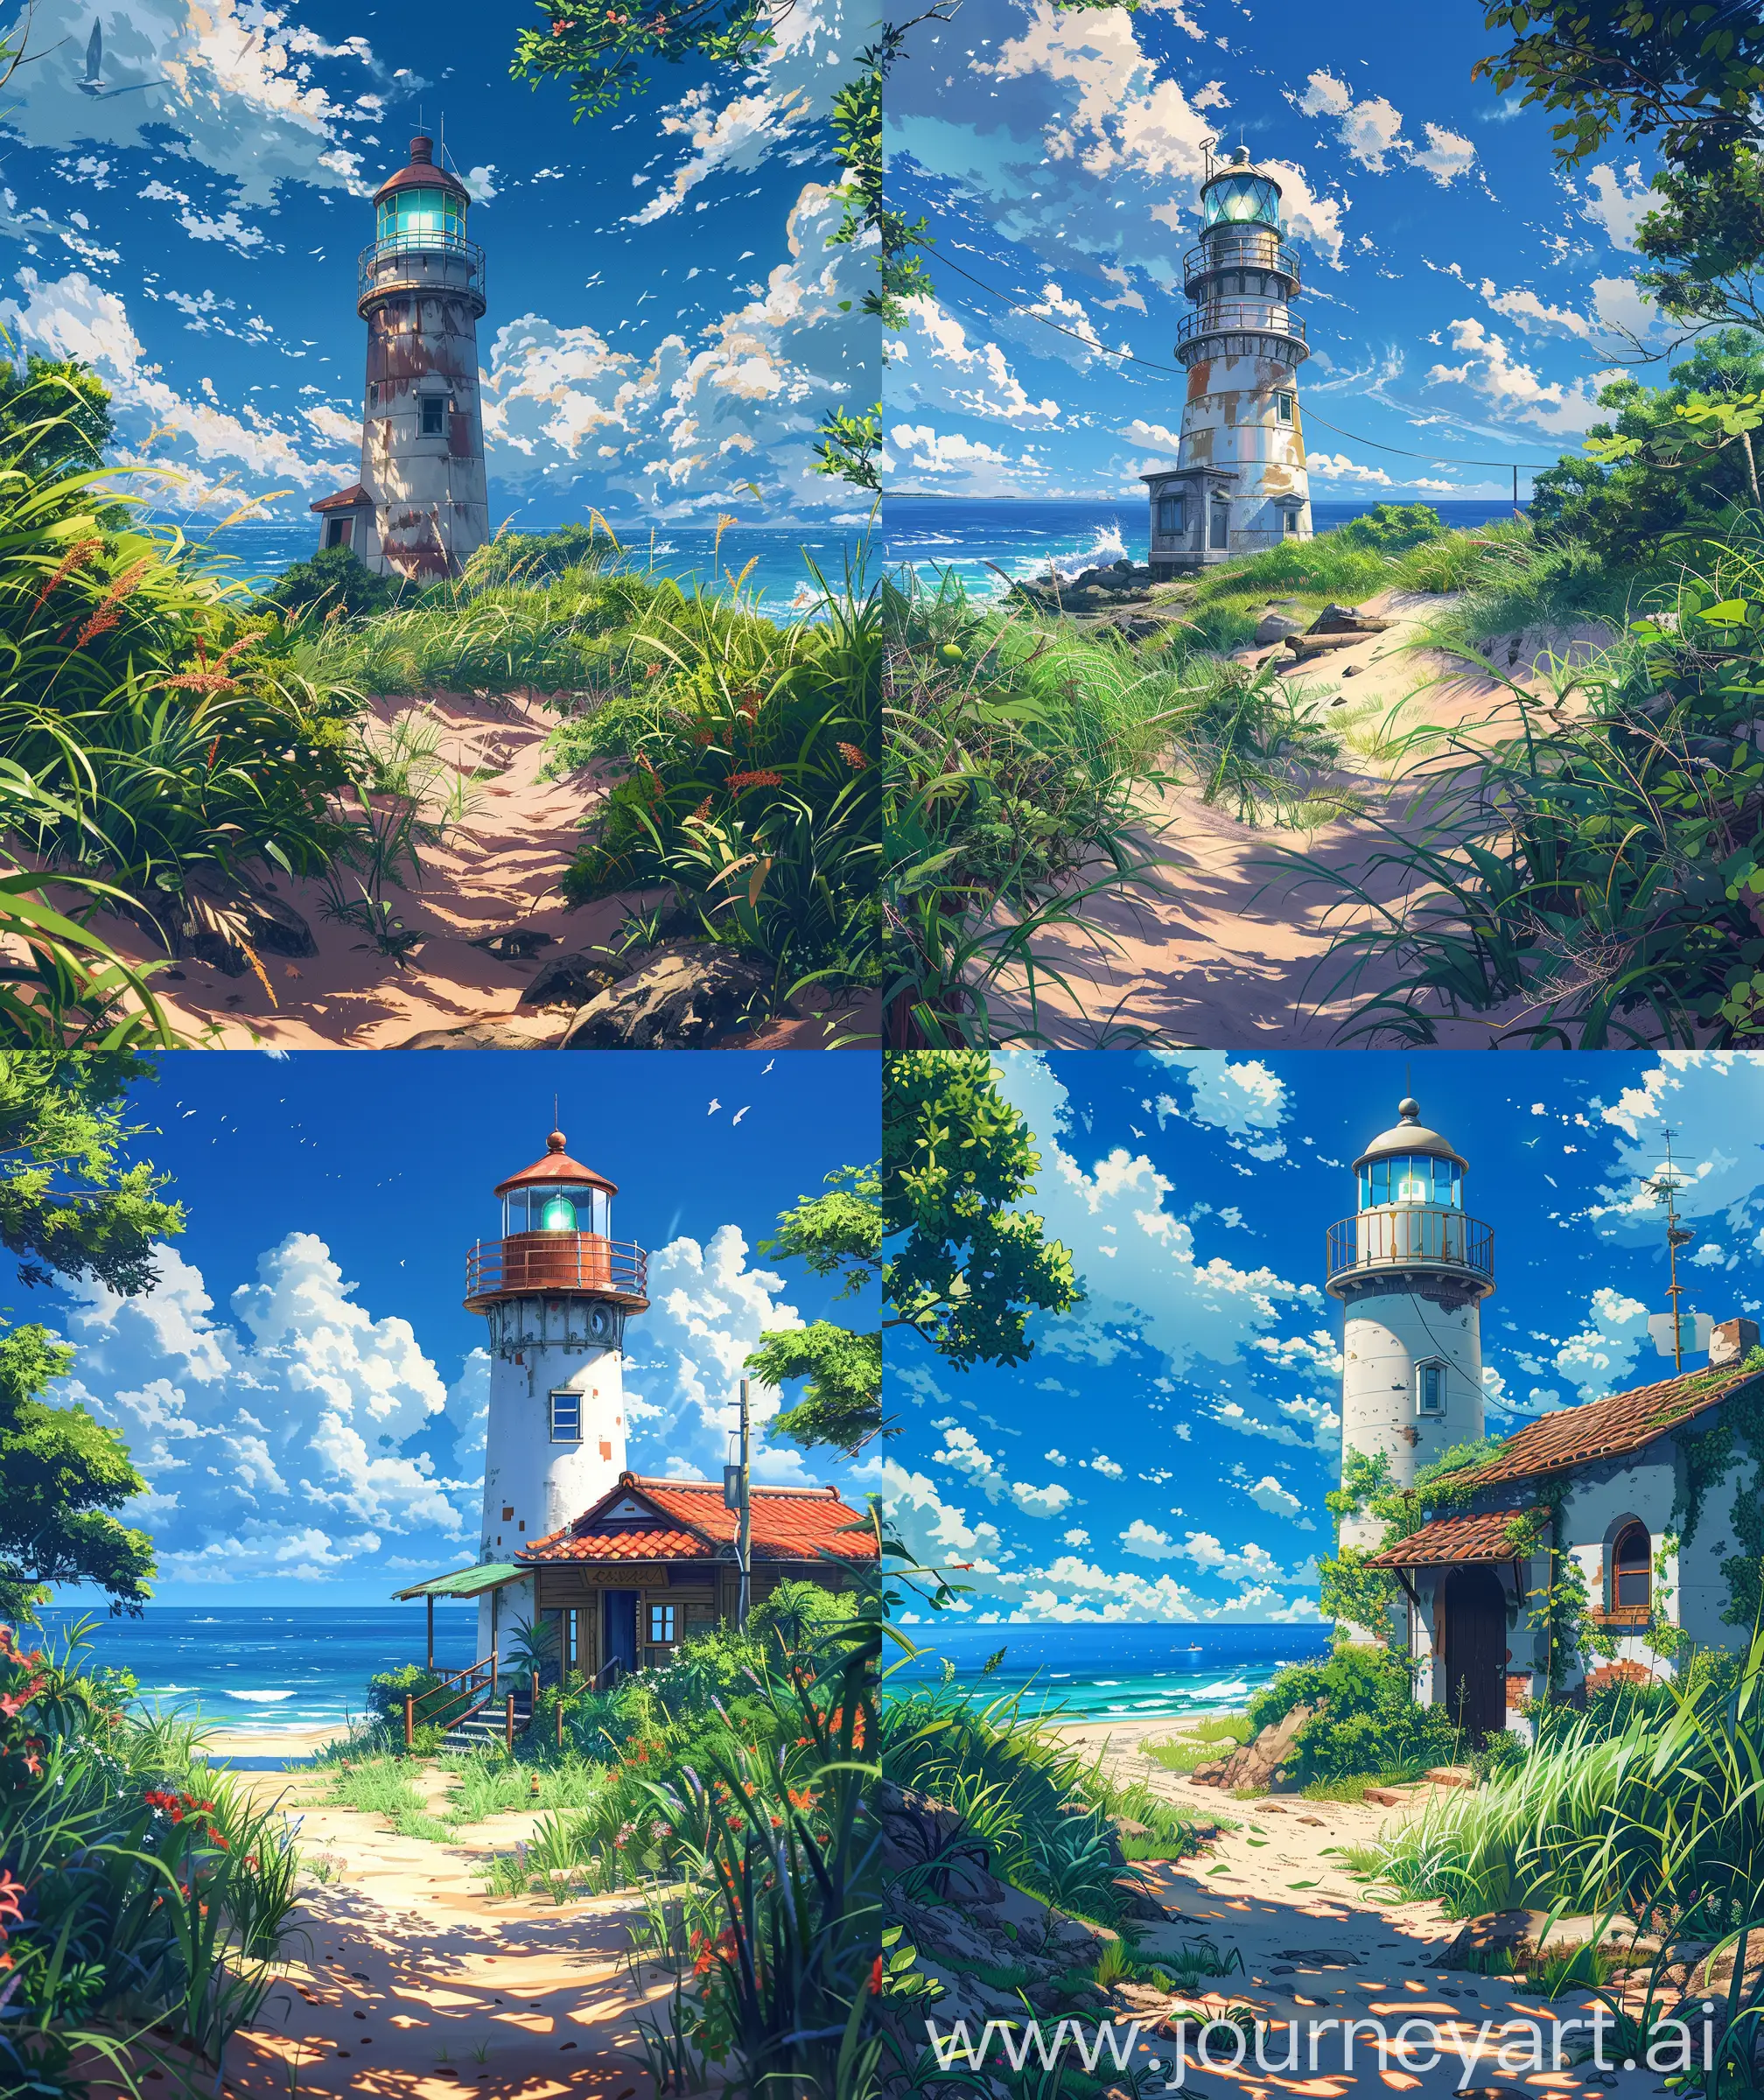 Beautiful anime scenary, mokoto shinkai and Ghibli style mix, direct front facade view of lighthouse, seaside, tropical view, sand, grass, tropical bushes, day time, blue sky, close up view, vibrant look, beautiful sky, anime scenary, ultra hd, High quality, sharp details no hyperrealistic --ar 27:32 --s 400